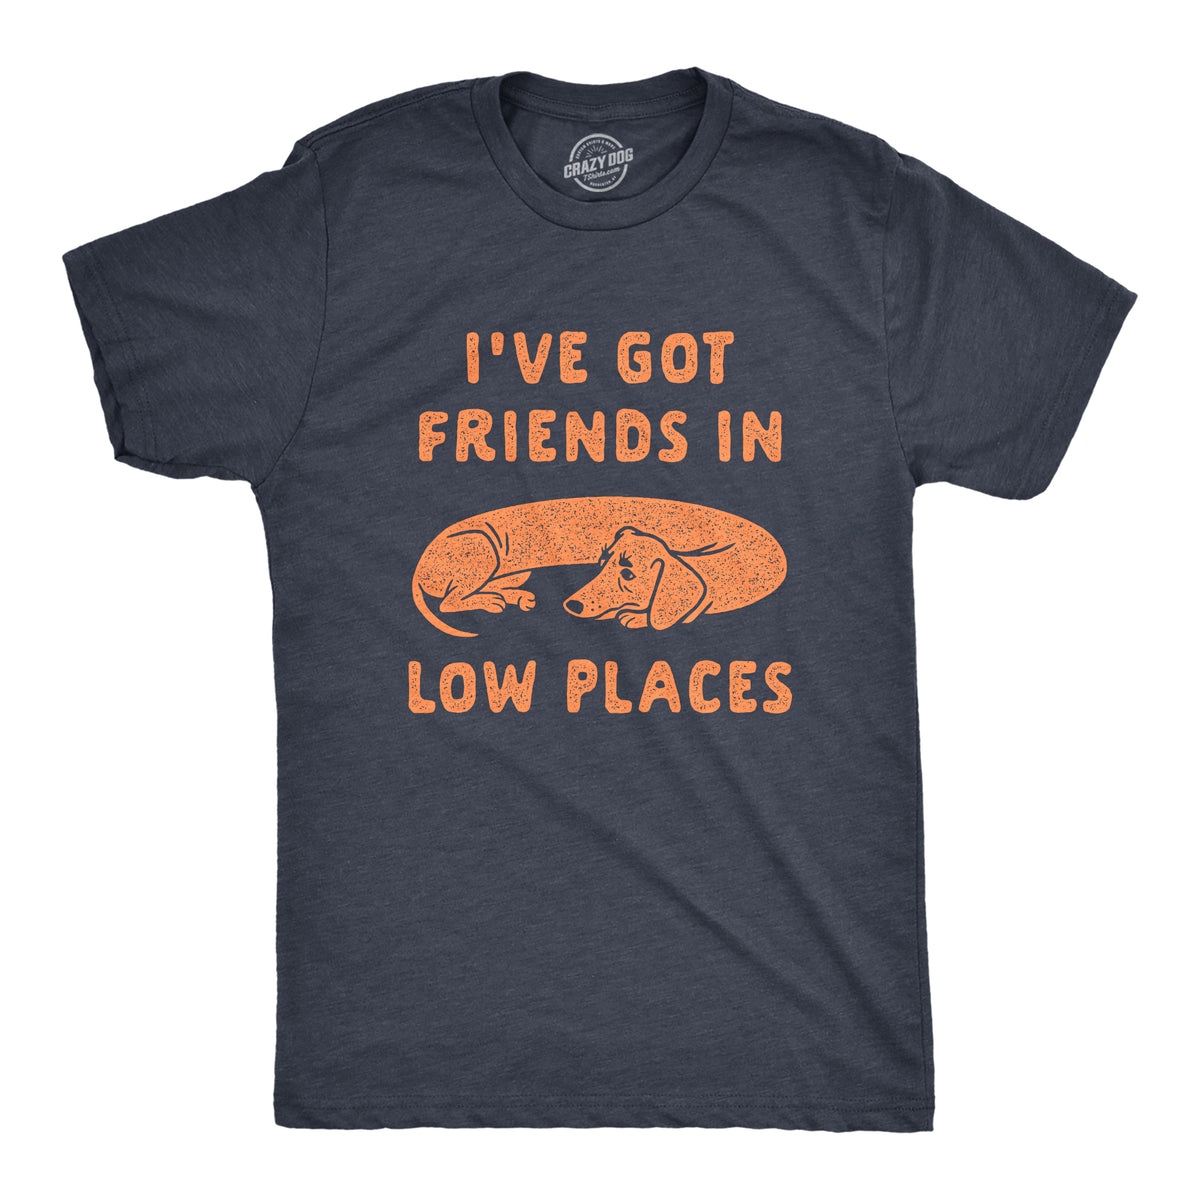 Funny Heather Navy Ive Got Friends In Low Places Mens T Shirt Nerdy Dog Tee